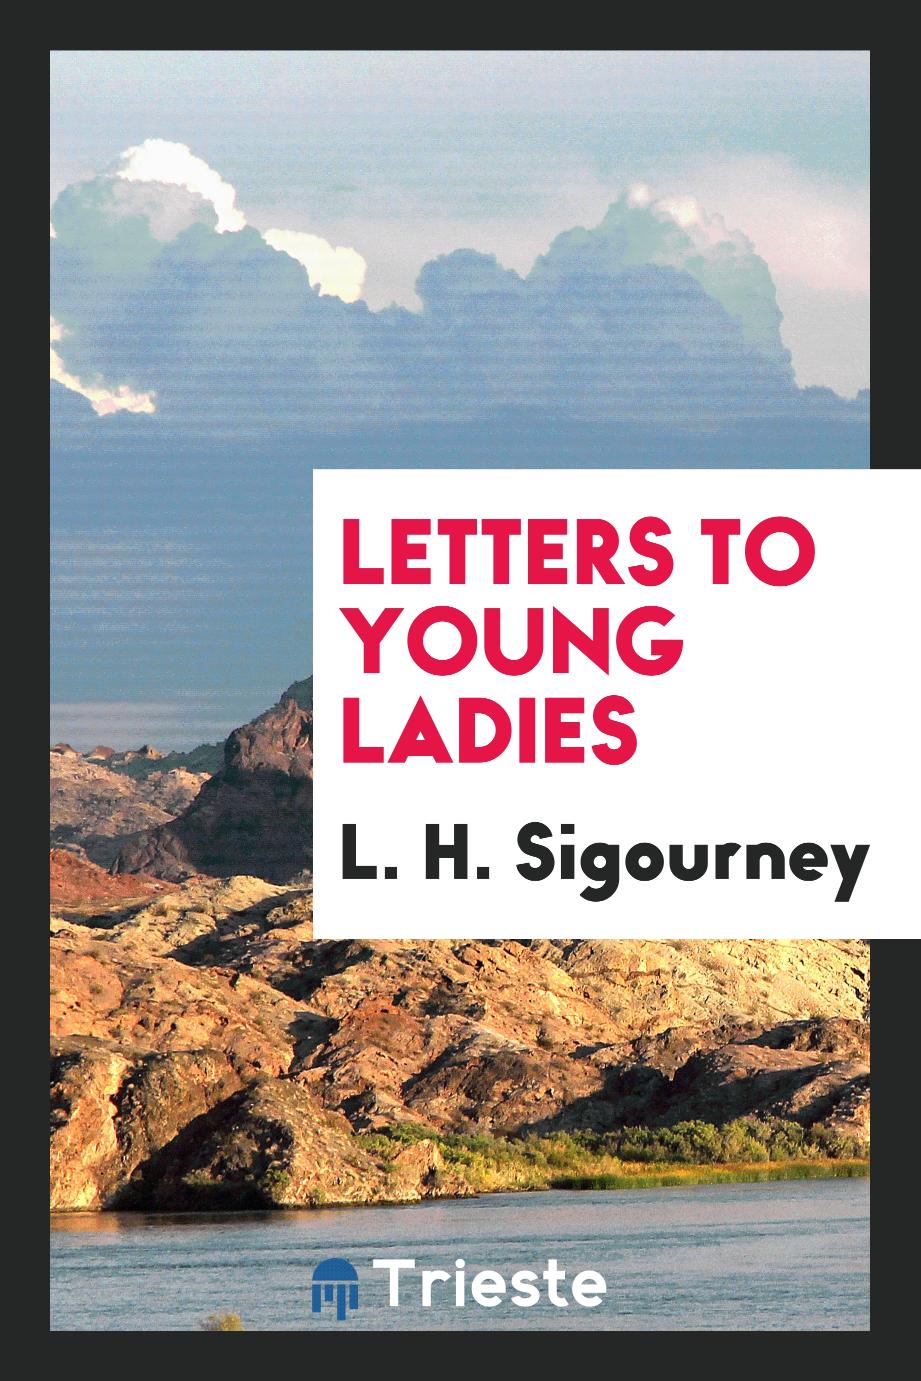 Letters to young ladies